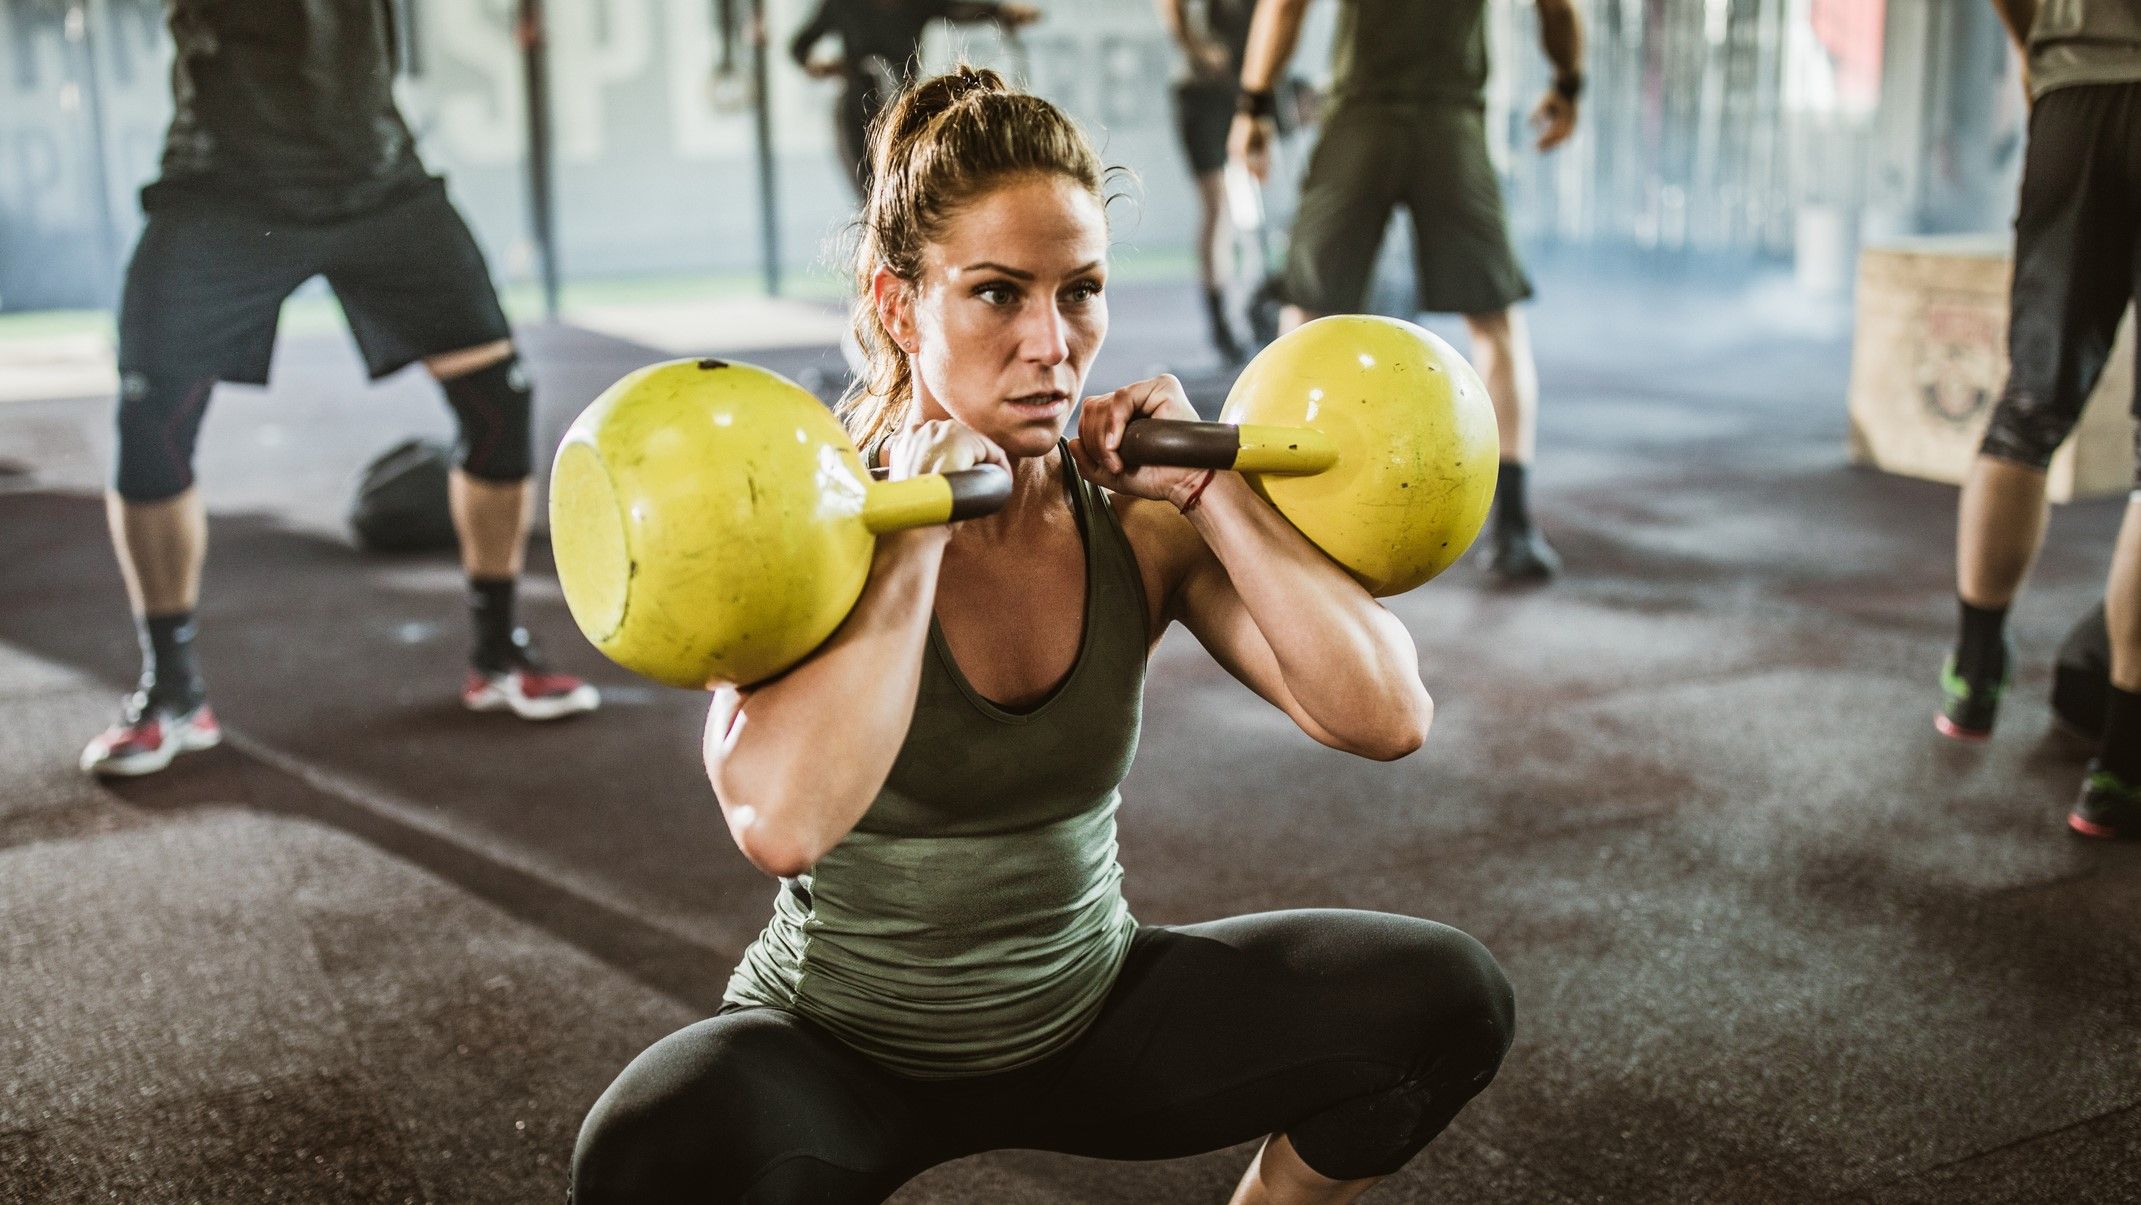 American kettlebell swings: How to do them and 3 benefits for